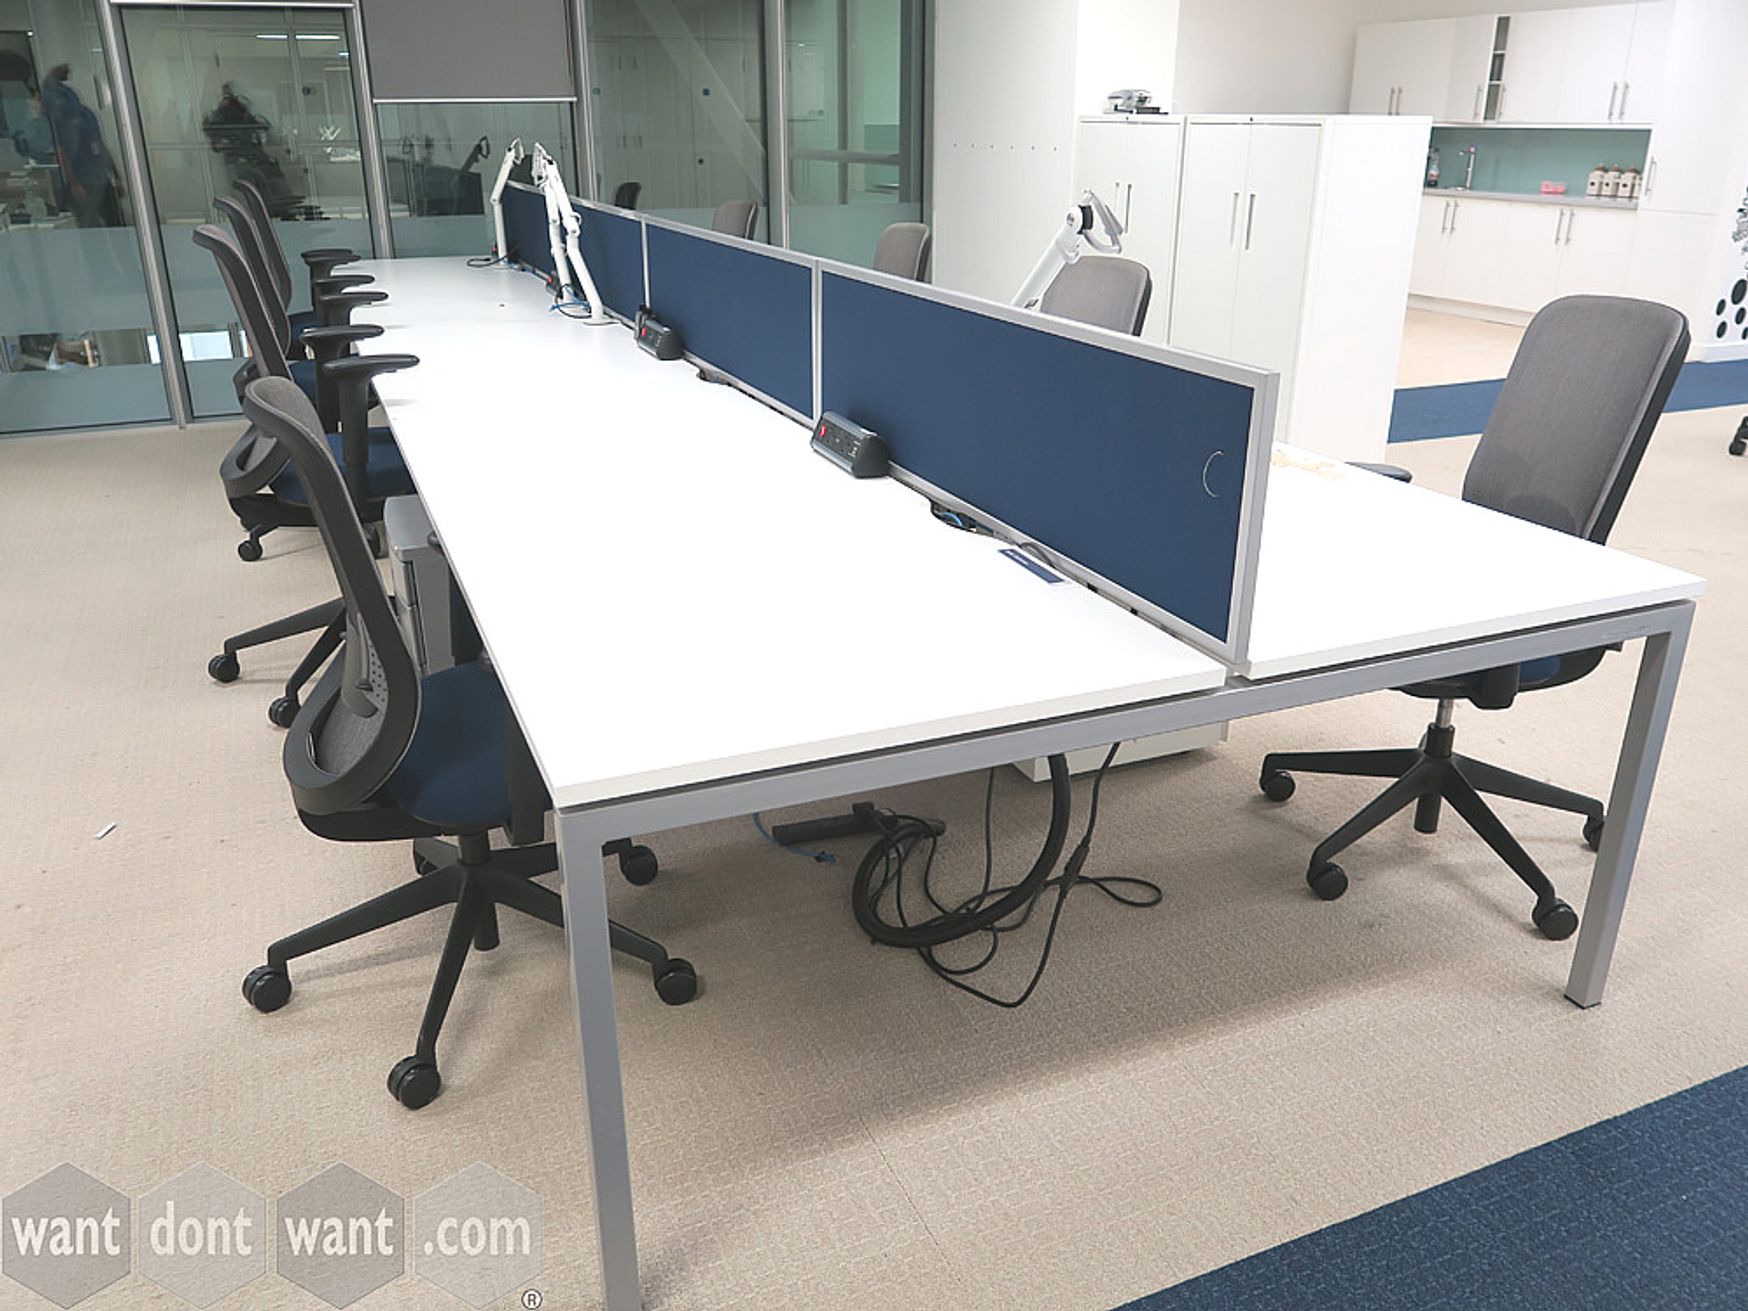 Used 1400mm Fabric Screens for Back to back desks